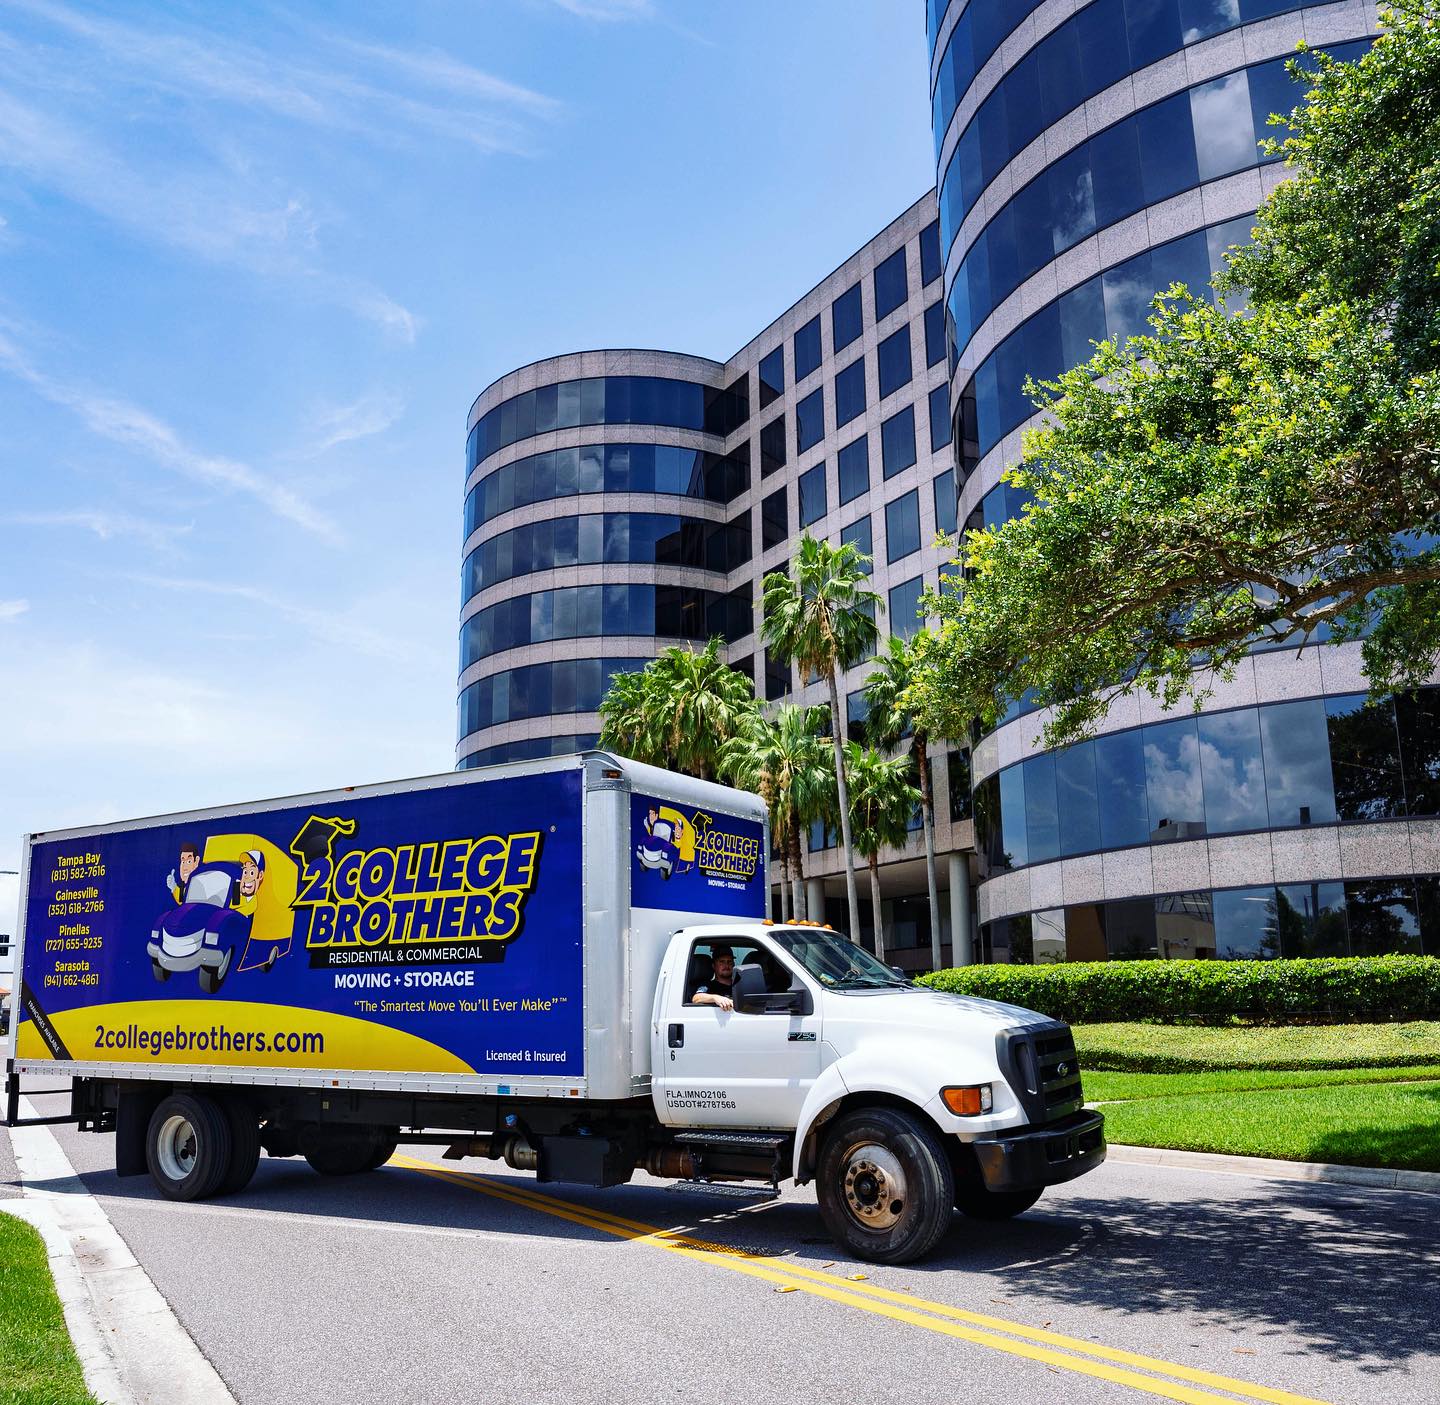 2 College Brothers Moving and Storage Mover Reviews Tampa